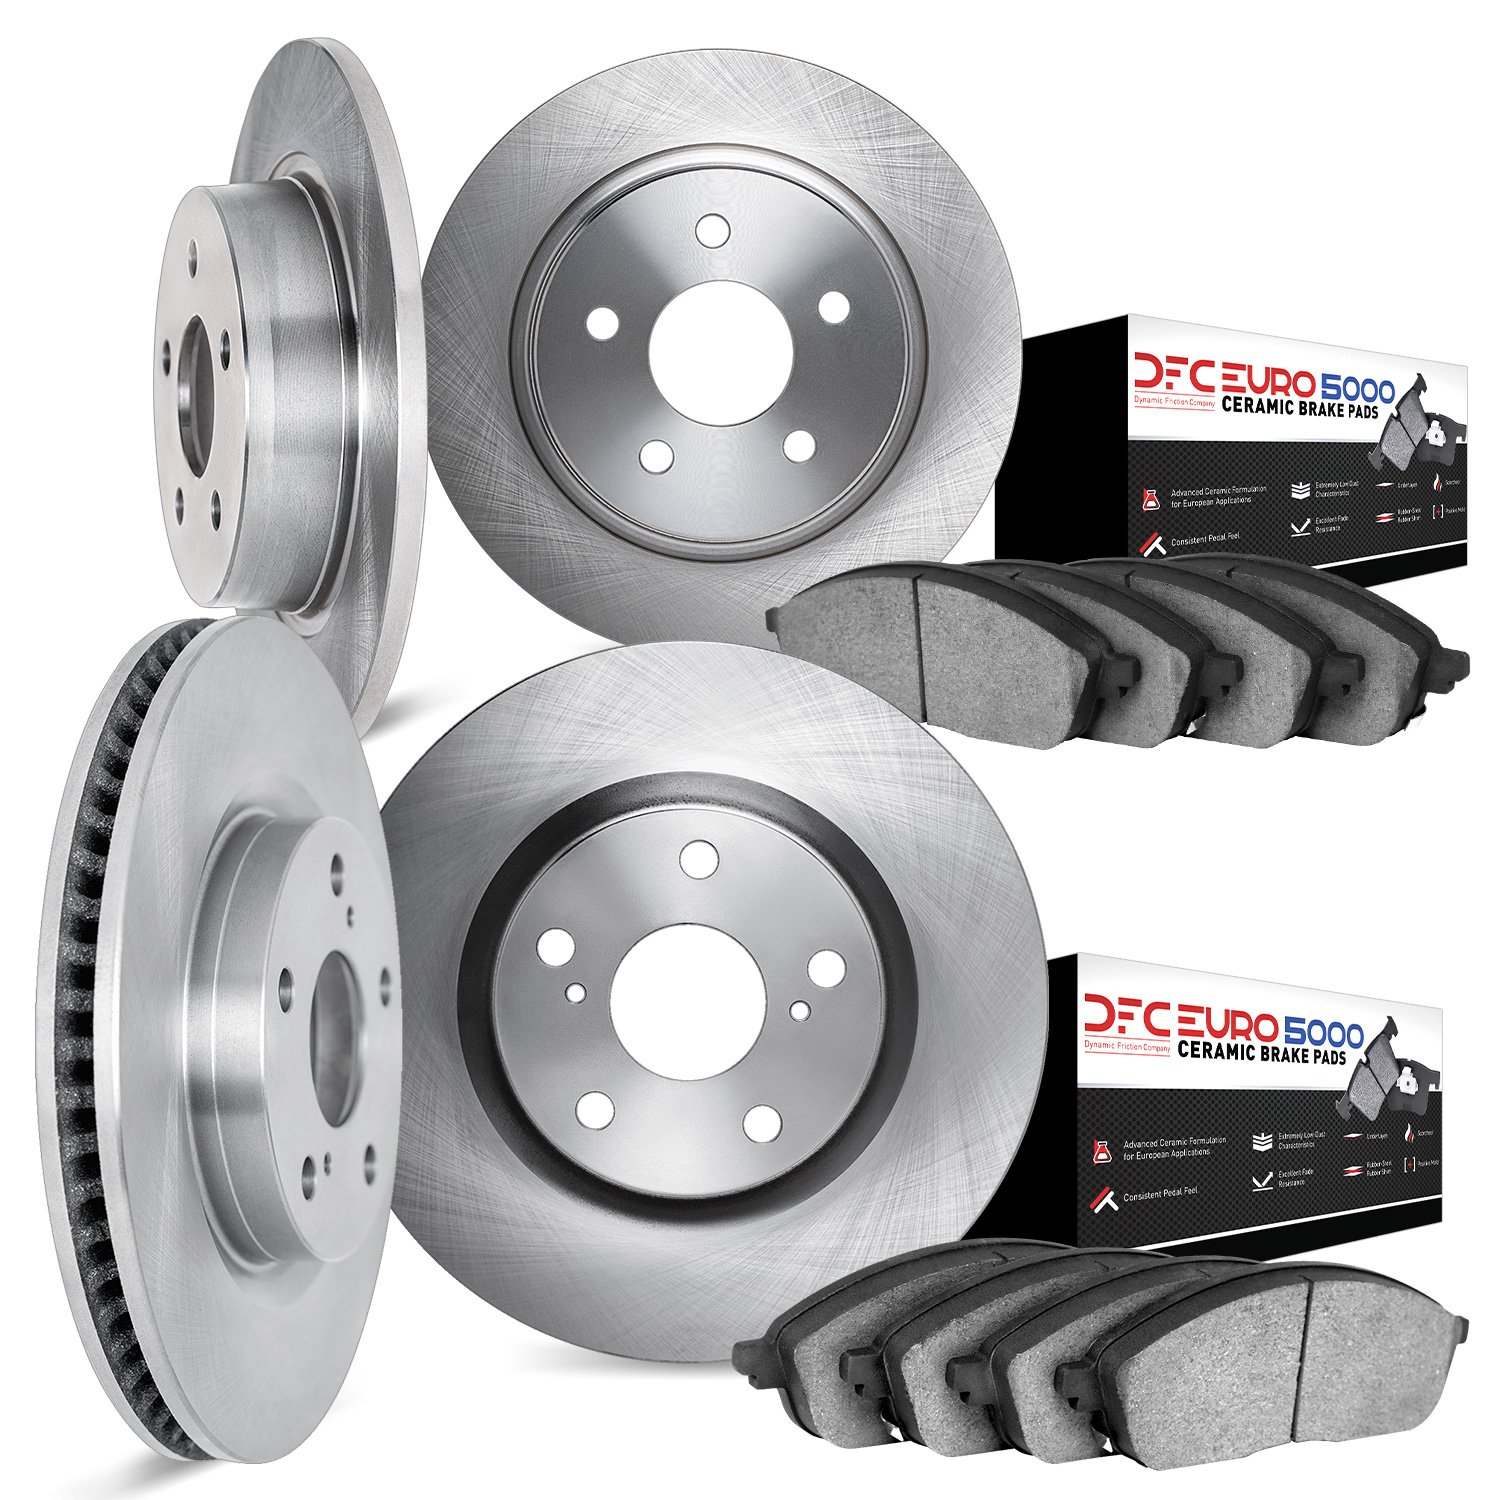 6604-10426 Brake Rotors w/5000 Euro Ceramic Brake Pads, 1999-2009 Volvo, Position: Front and Rear